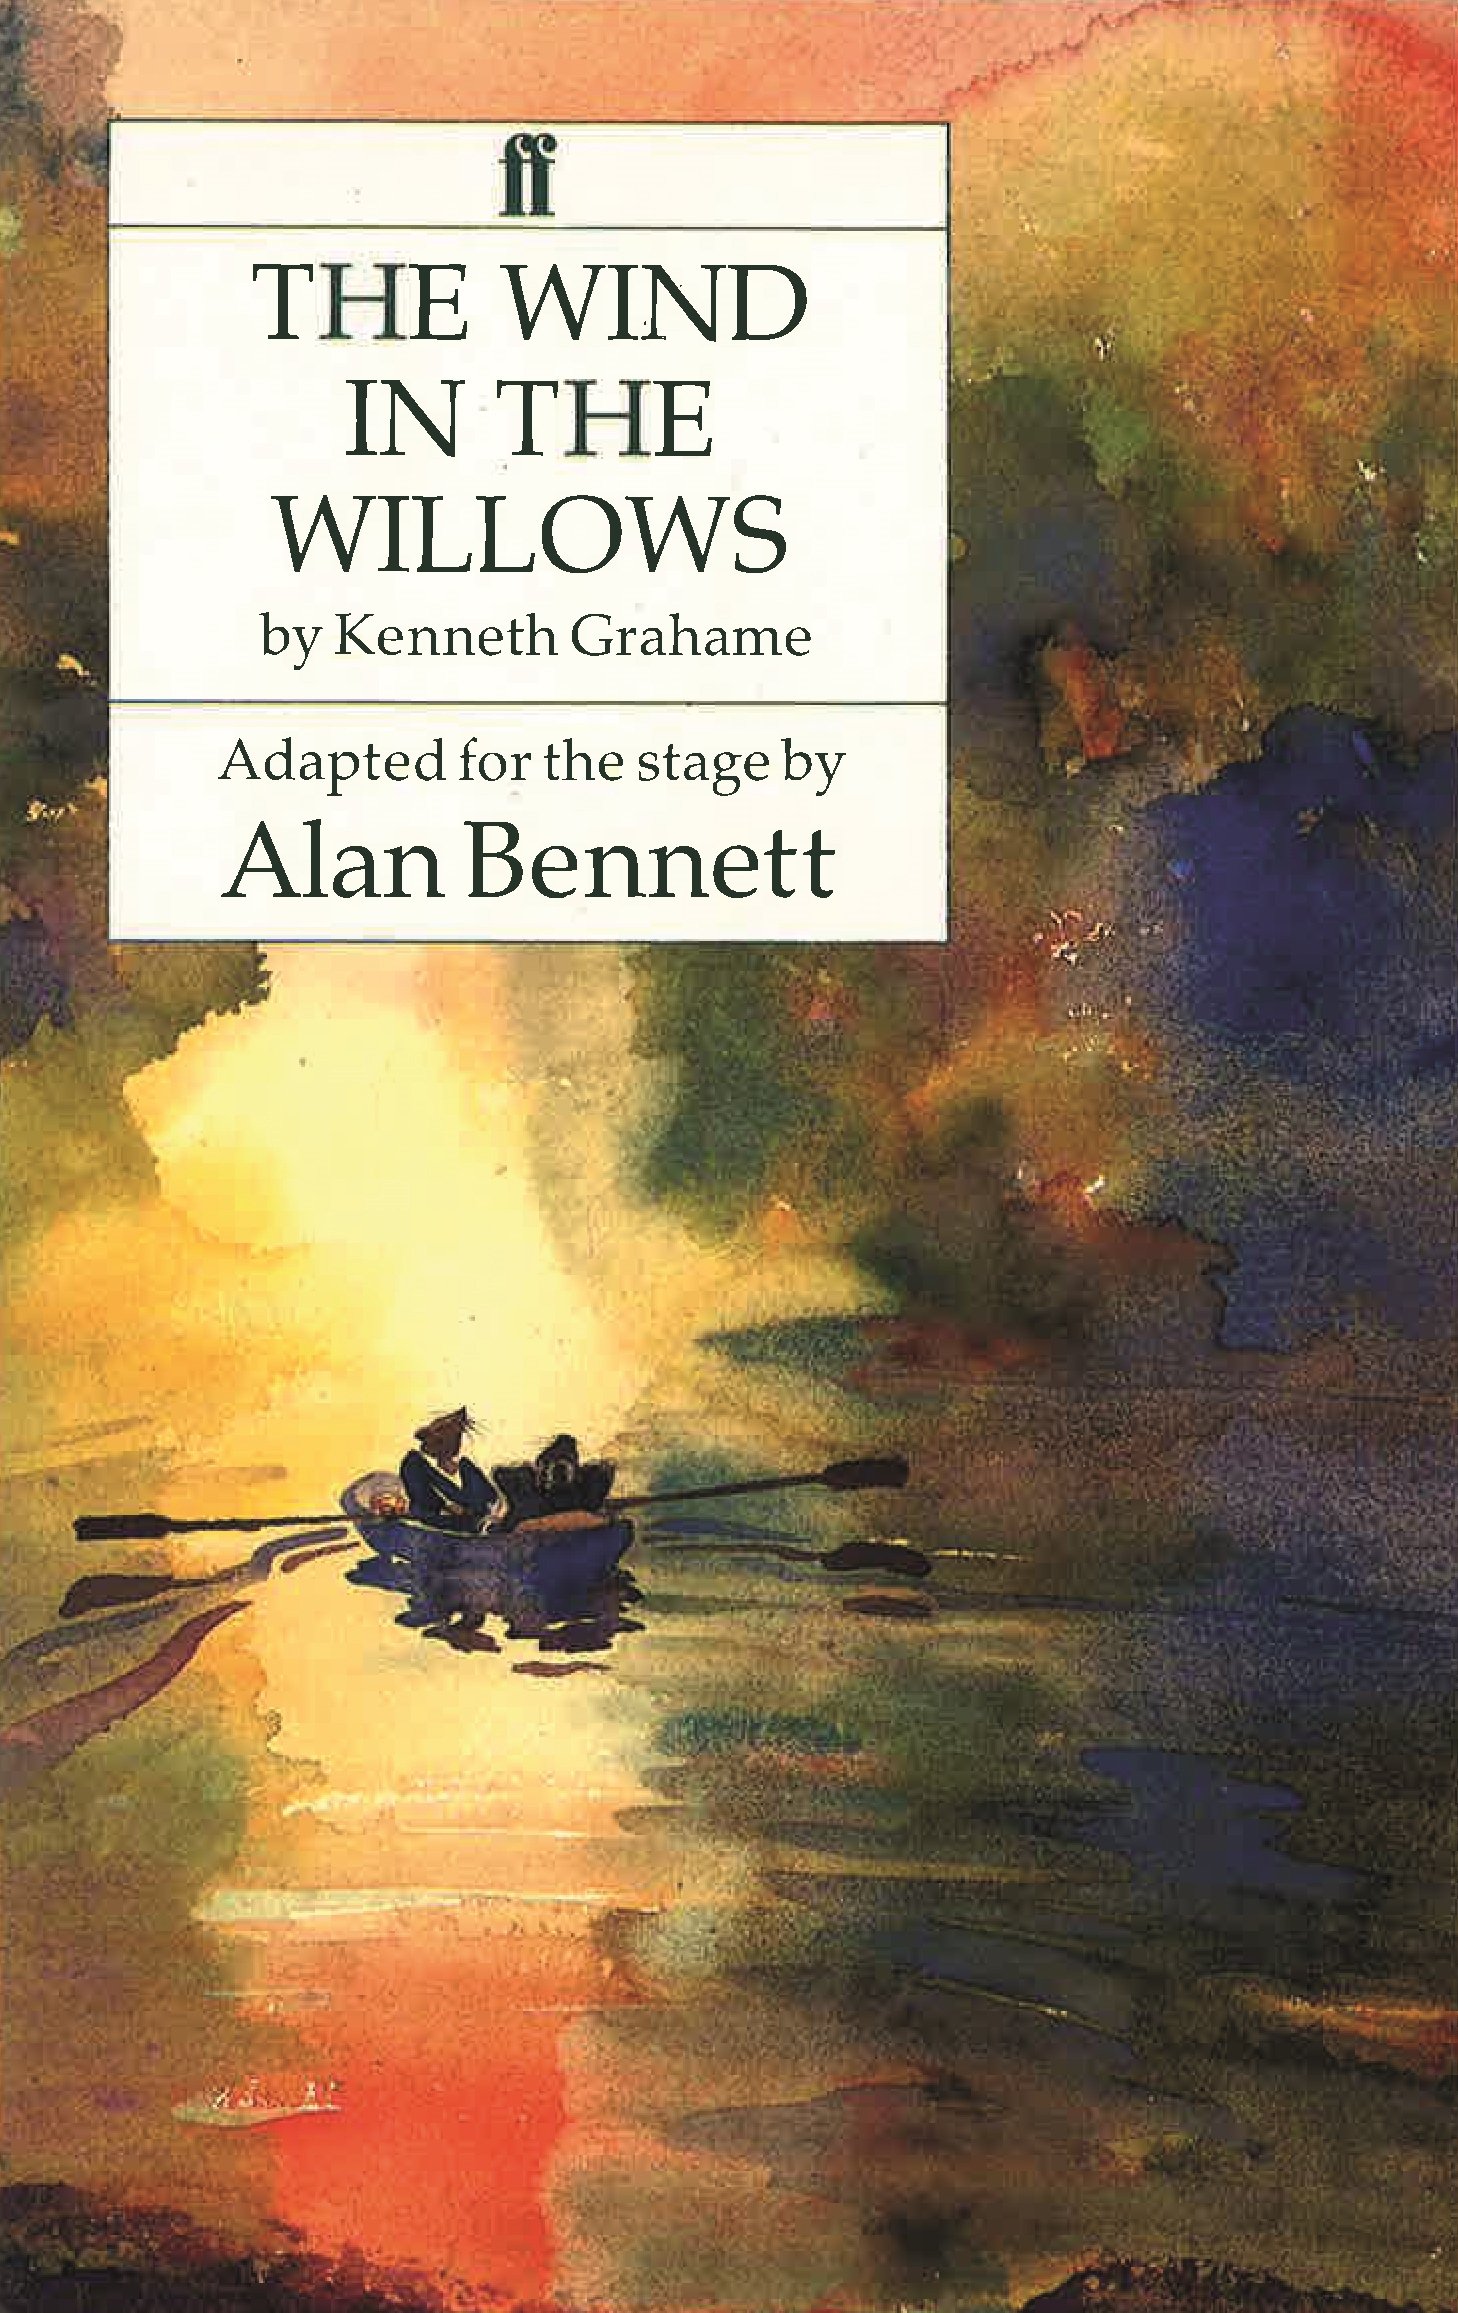 wind in the willows story summary